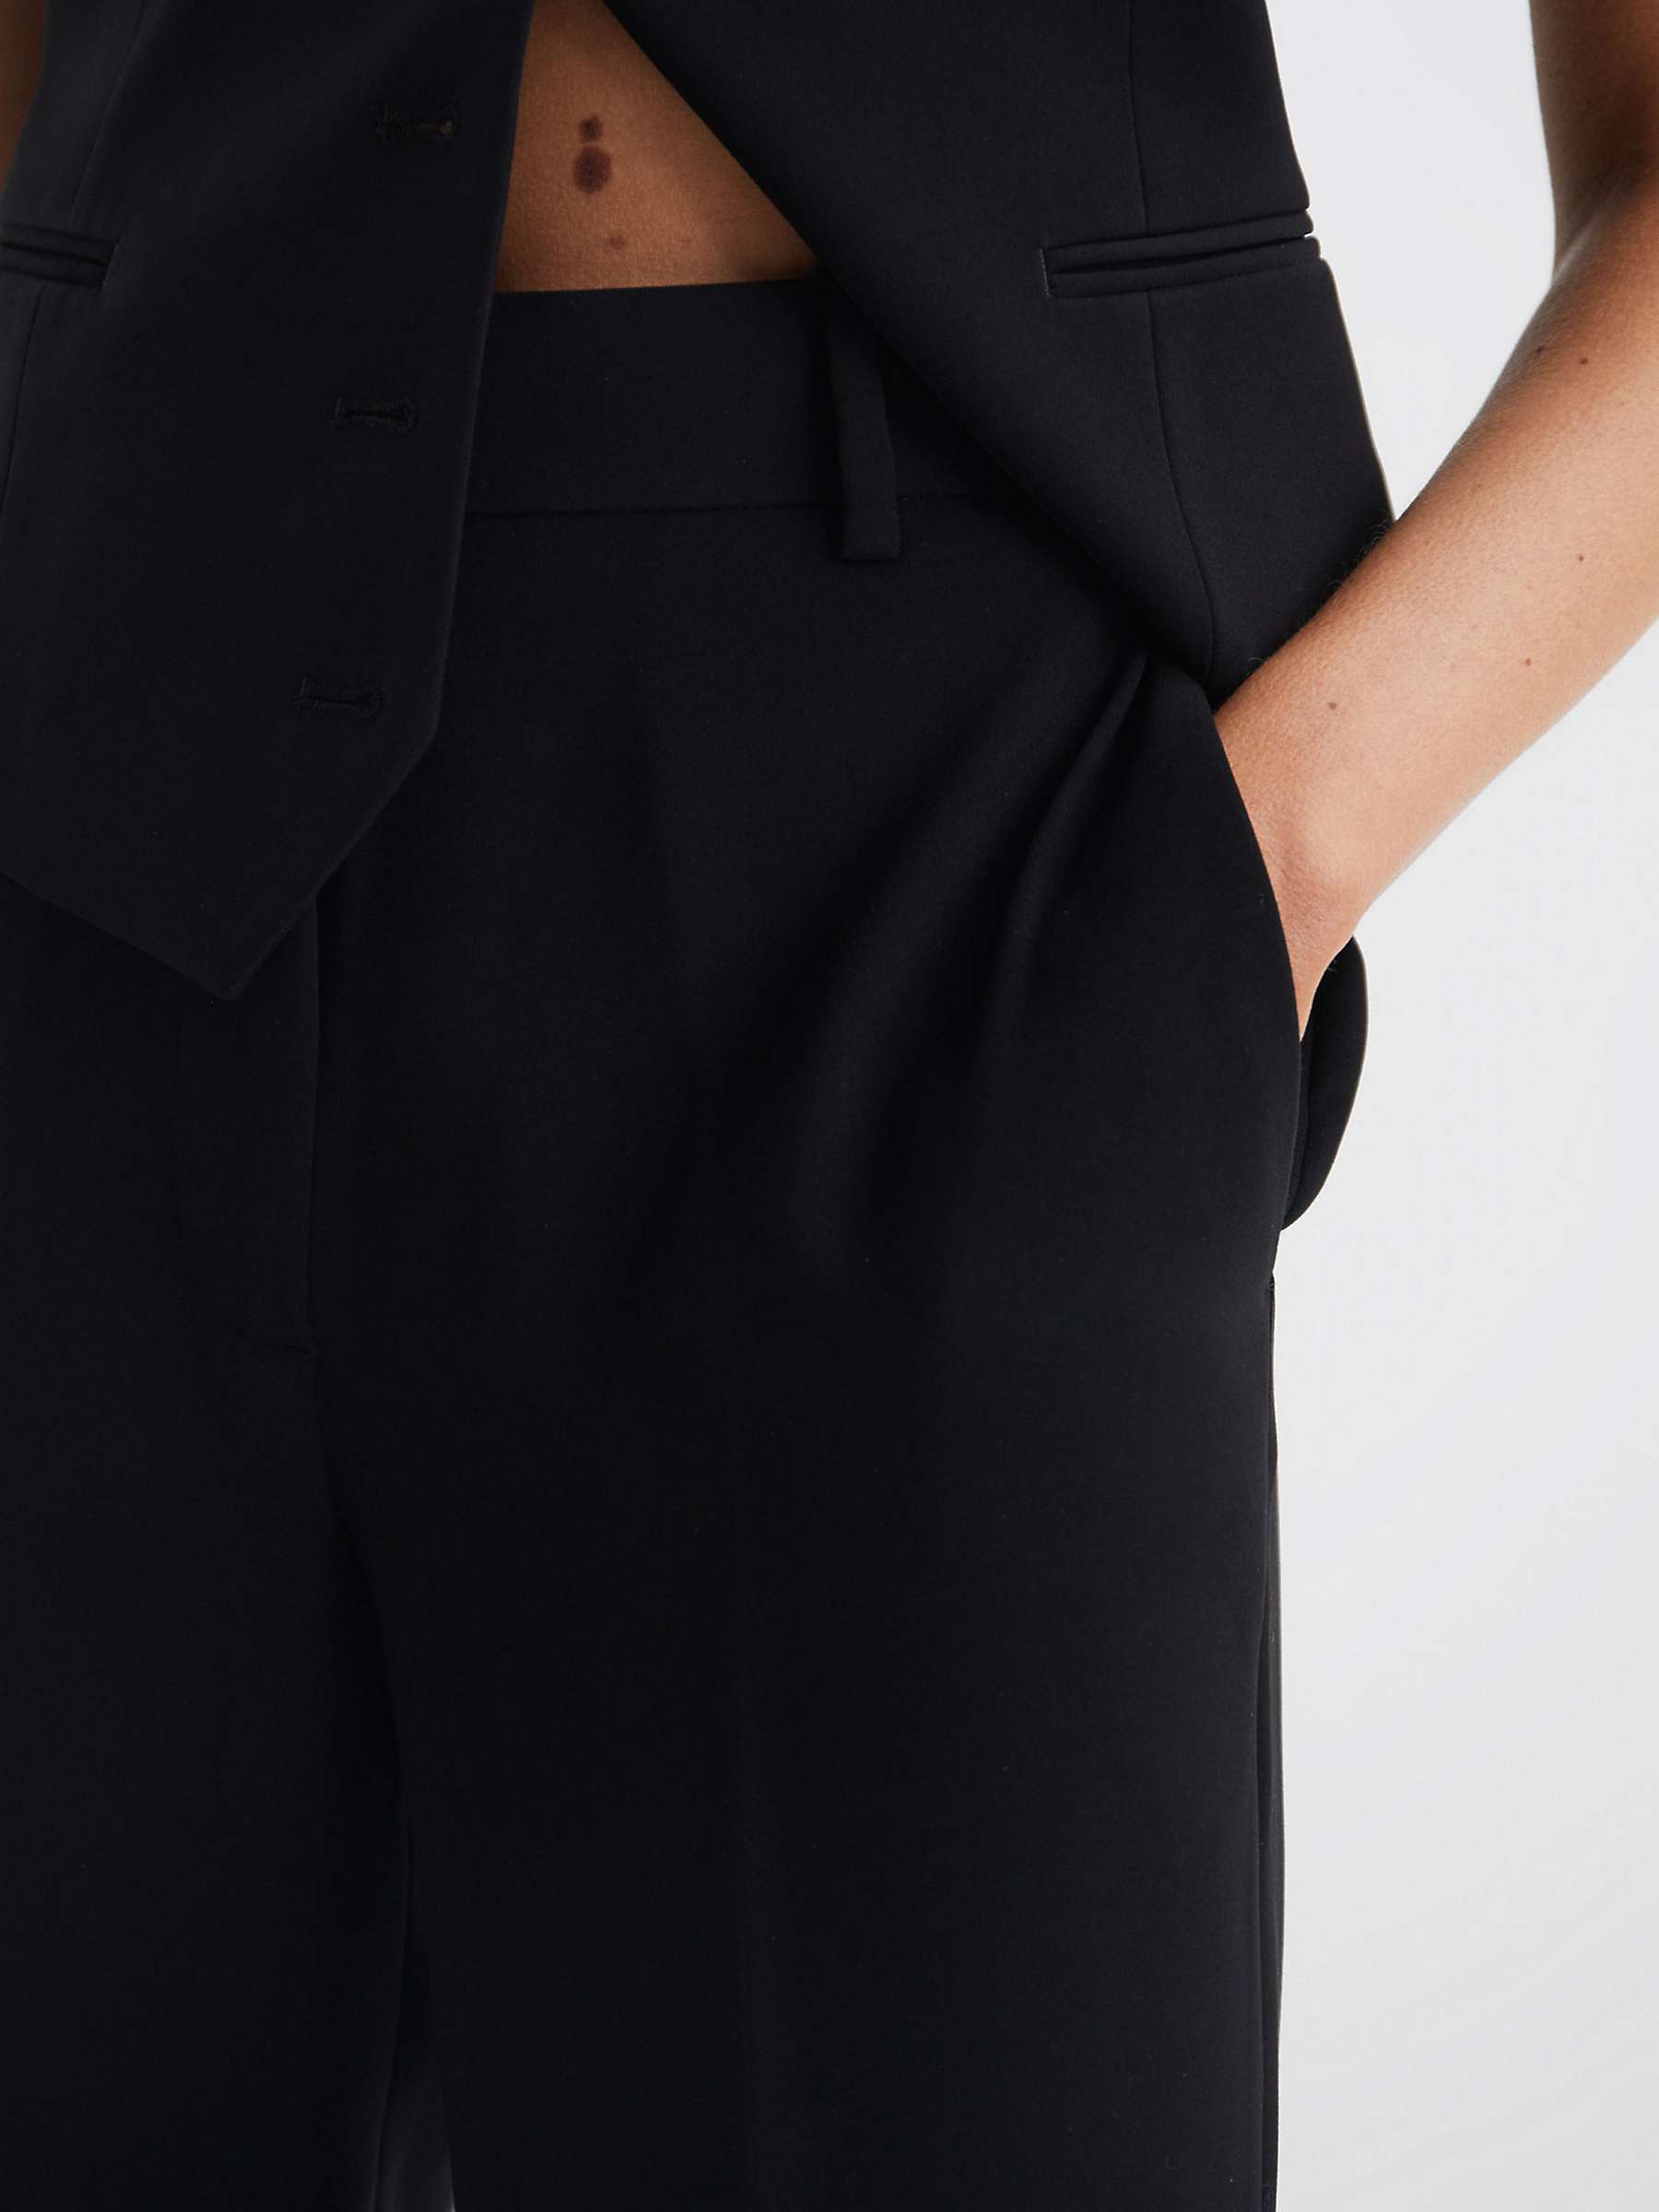 Buy Reiss Margeaux Tailored Trousers Online at johnlewis.com